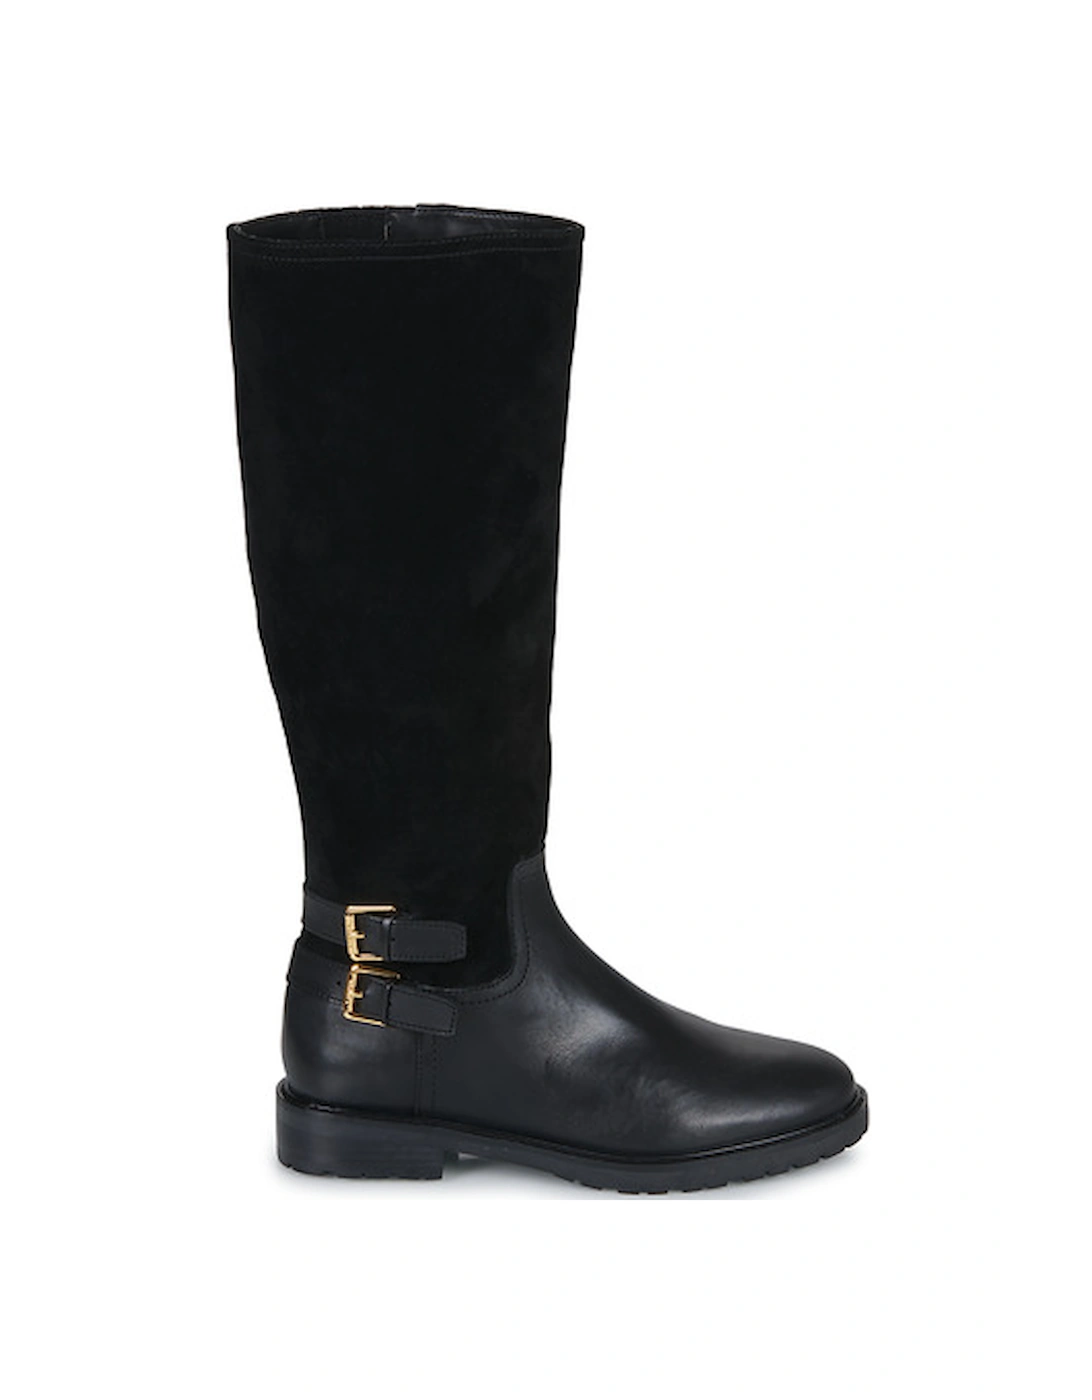 EMELIE-BOOTS-TALL BOOT